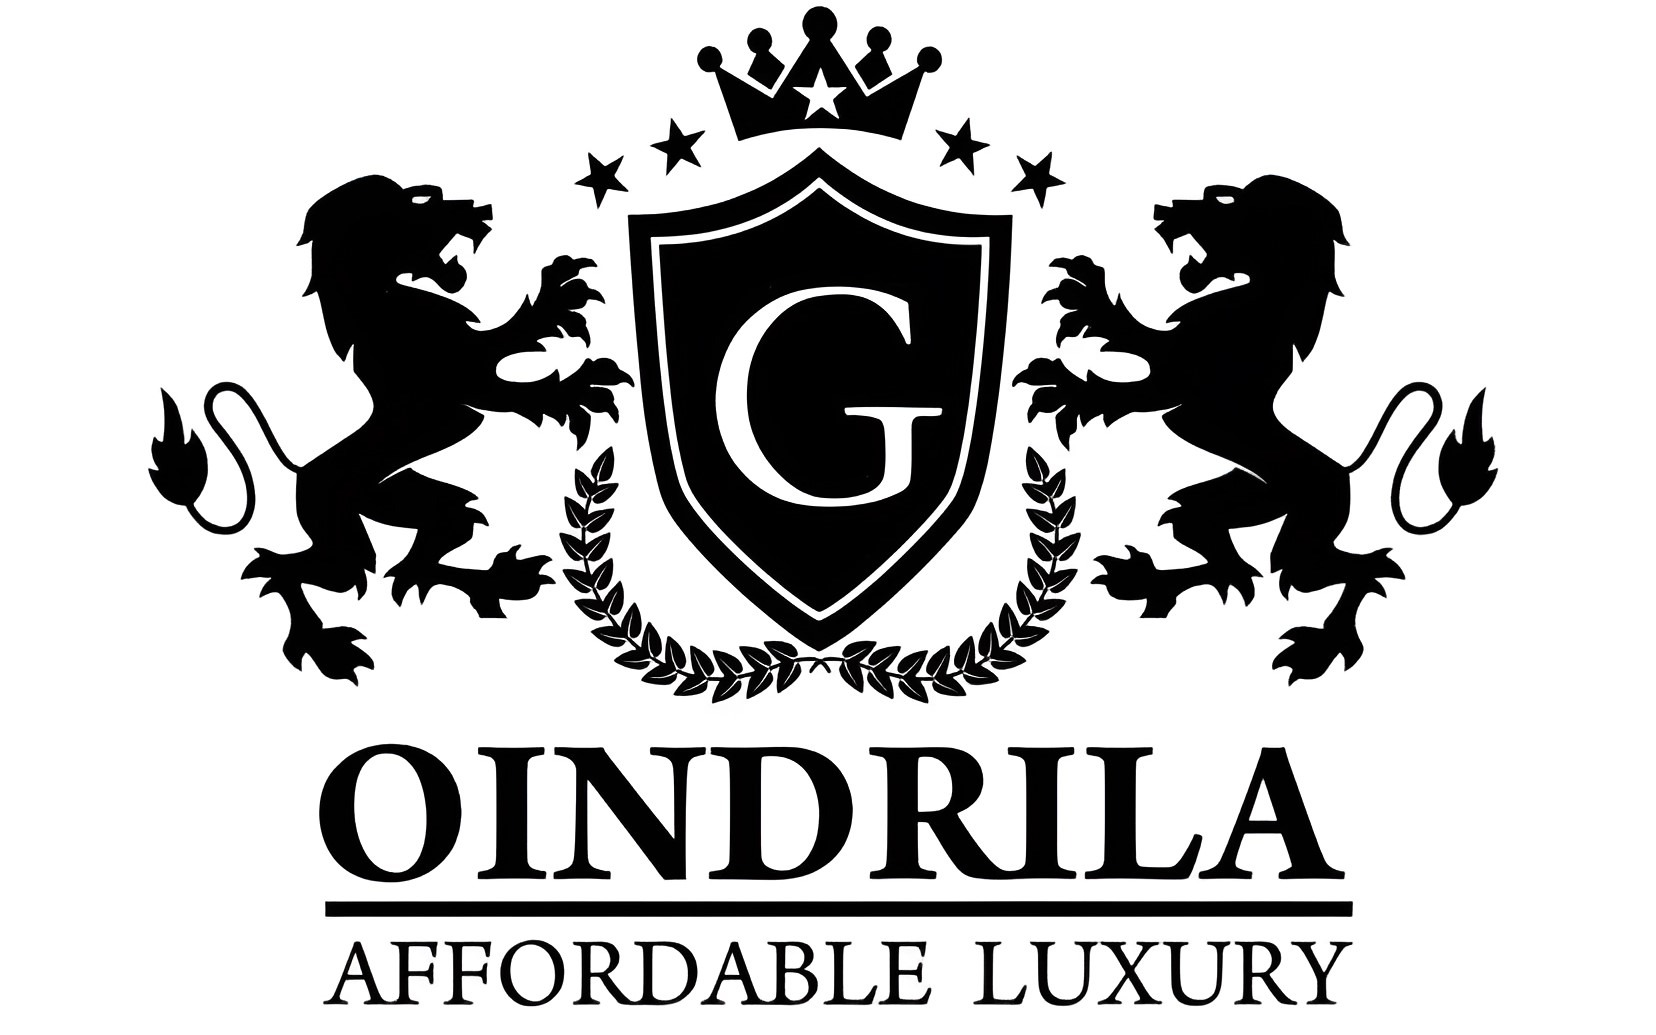 G Oindrila Affordable Luxury